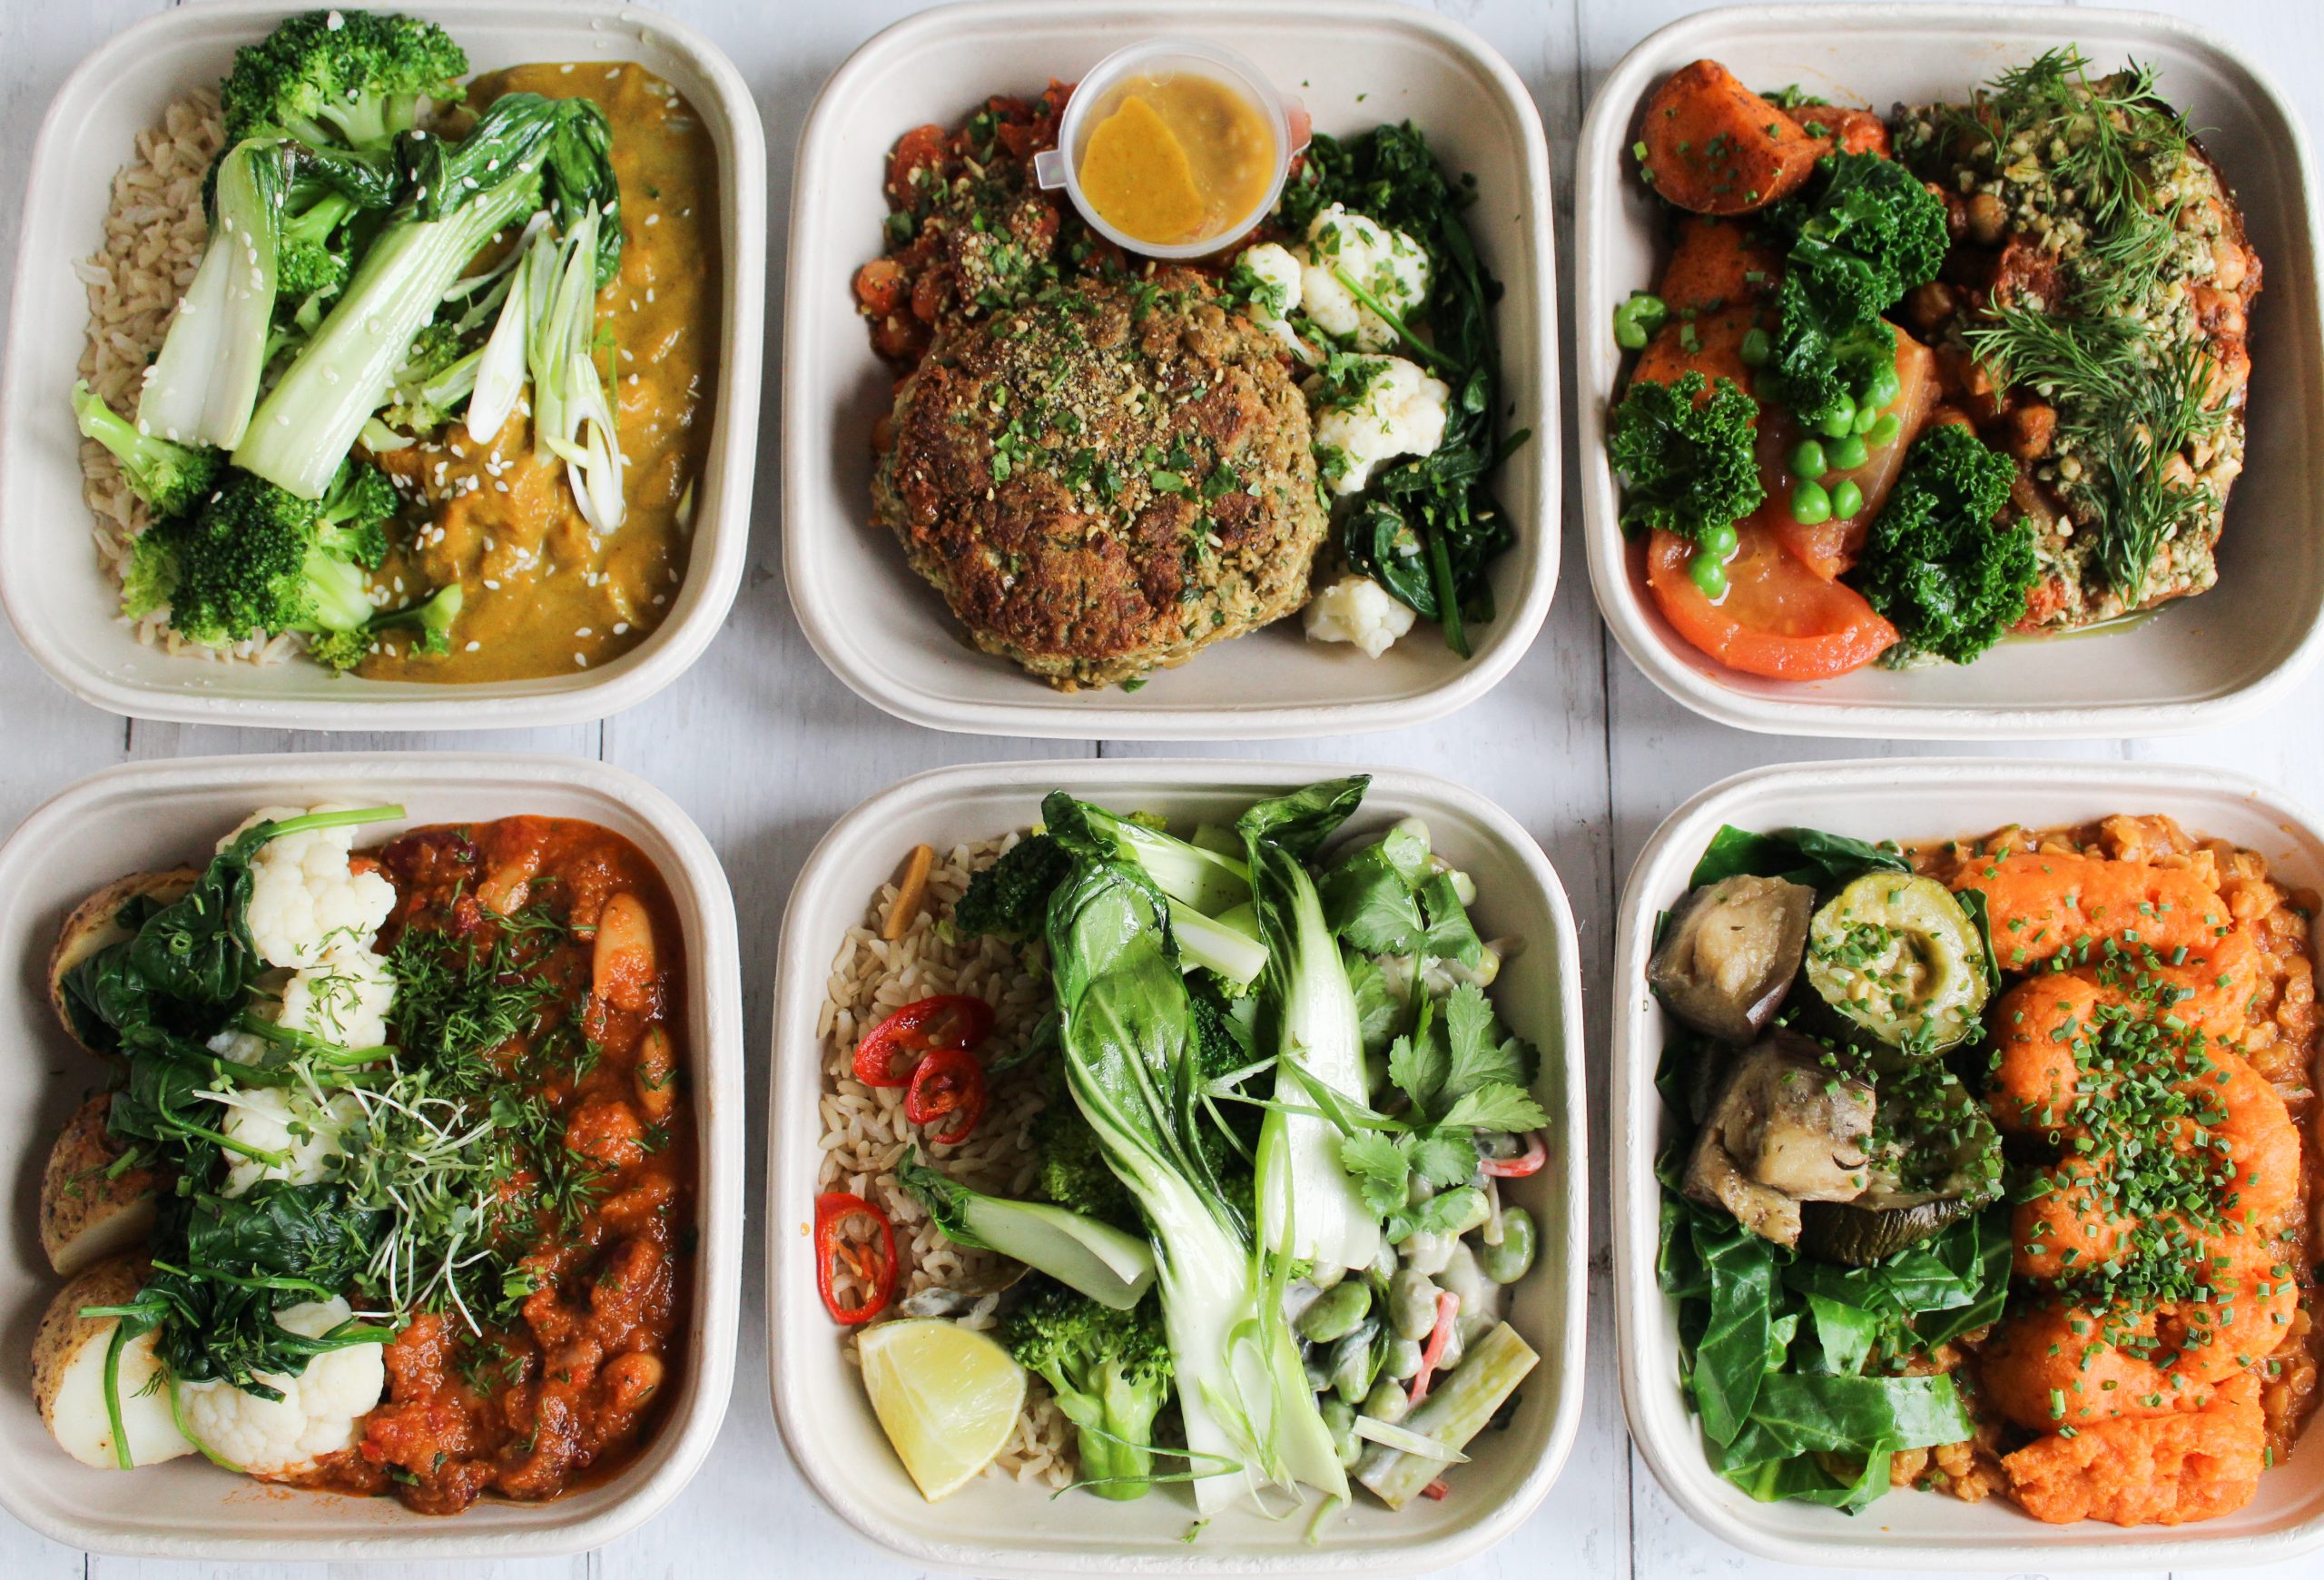 No1 Food Prep; the fitness focused meal kit you need to know about